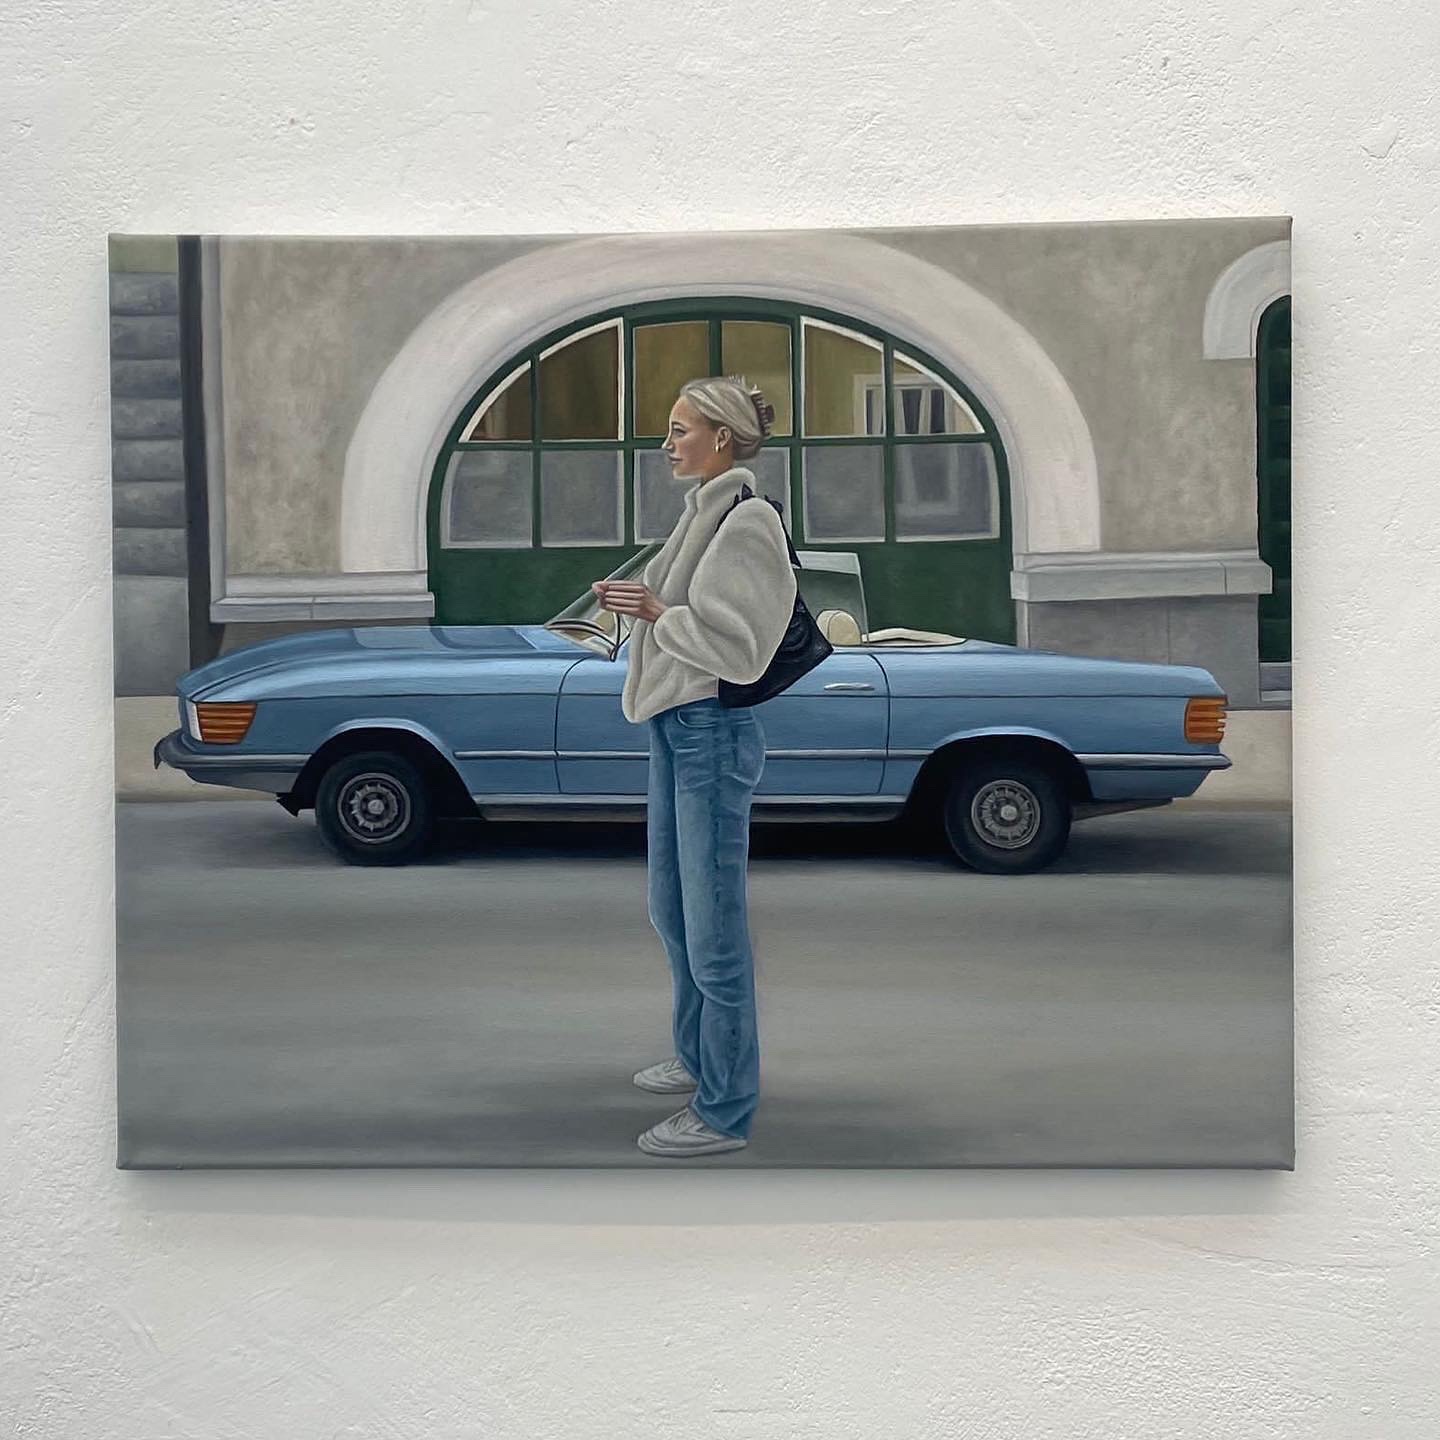 BA Fine Art work by Jessica Fearon showing a girl standing in front of a blue car